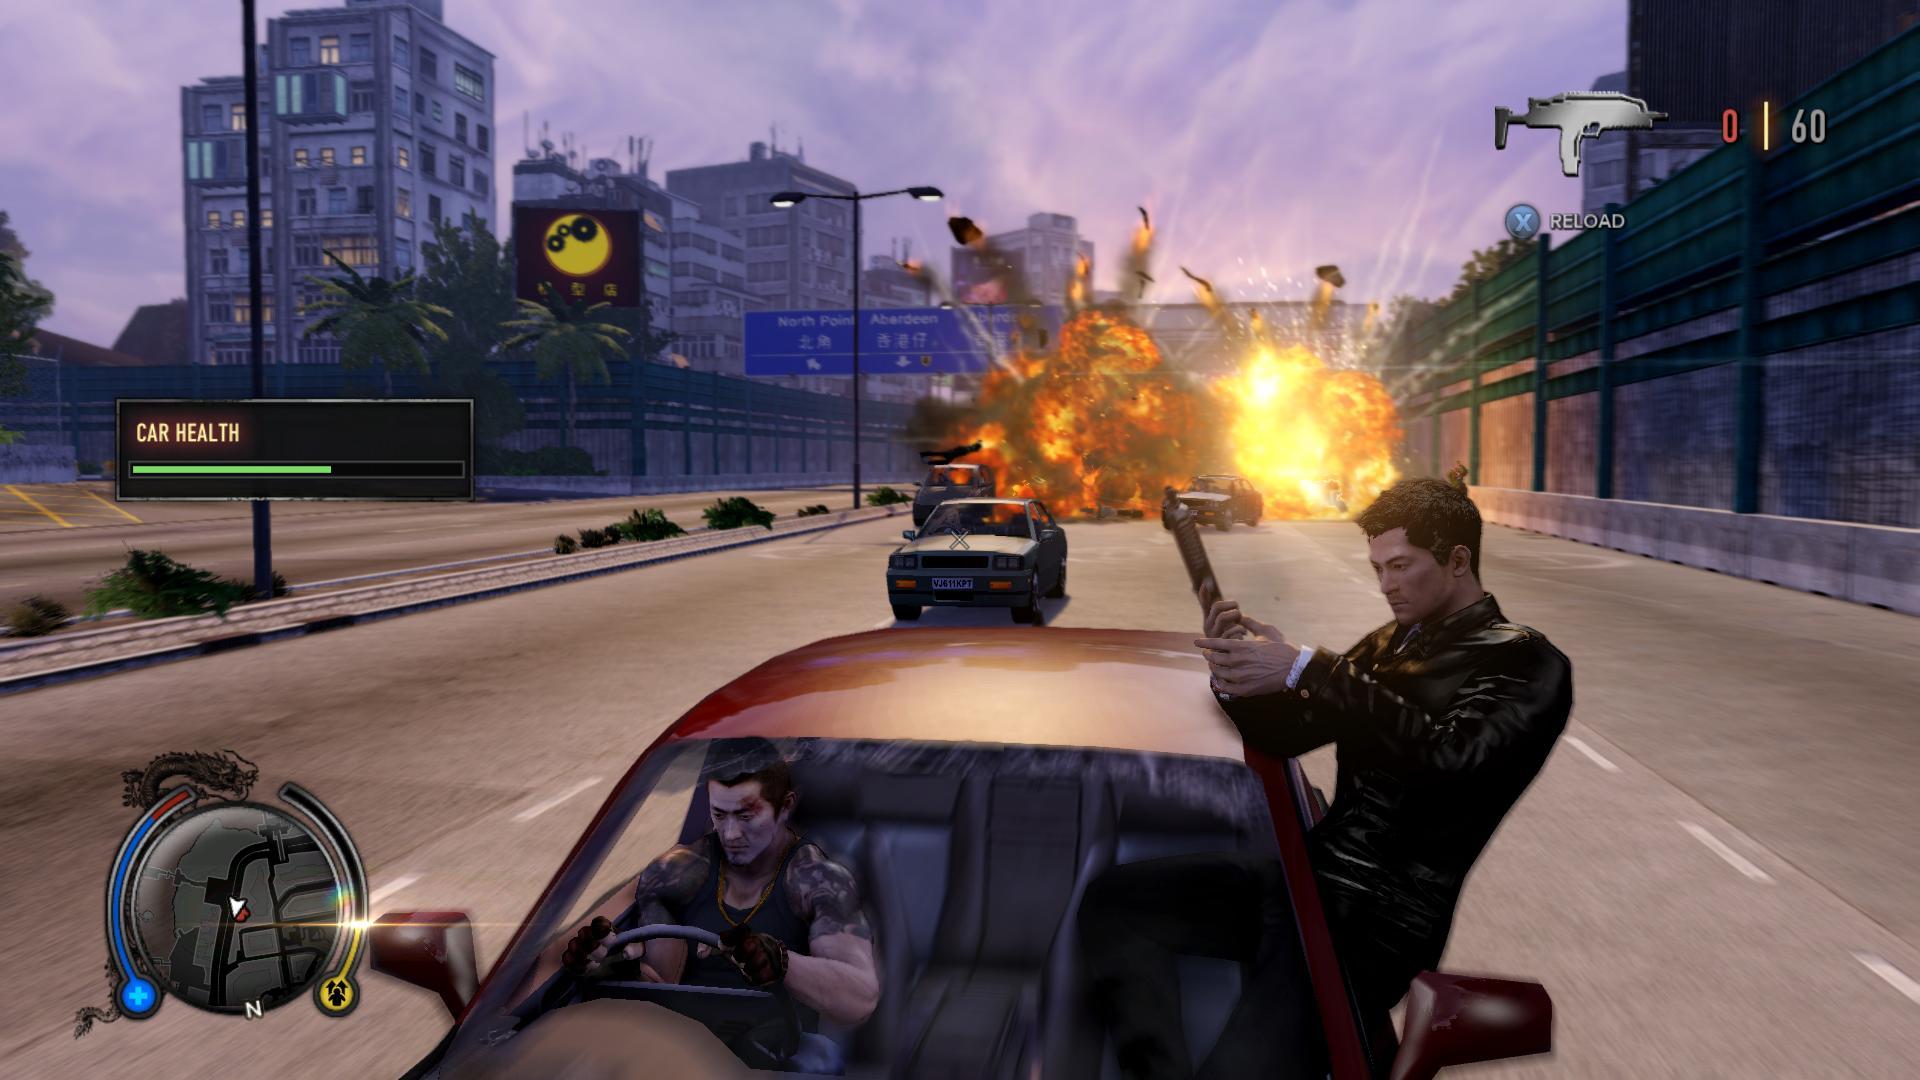 Will the Sleeping Dogs 2 game be released? - Quora